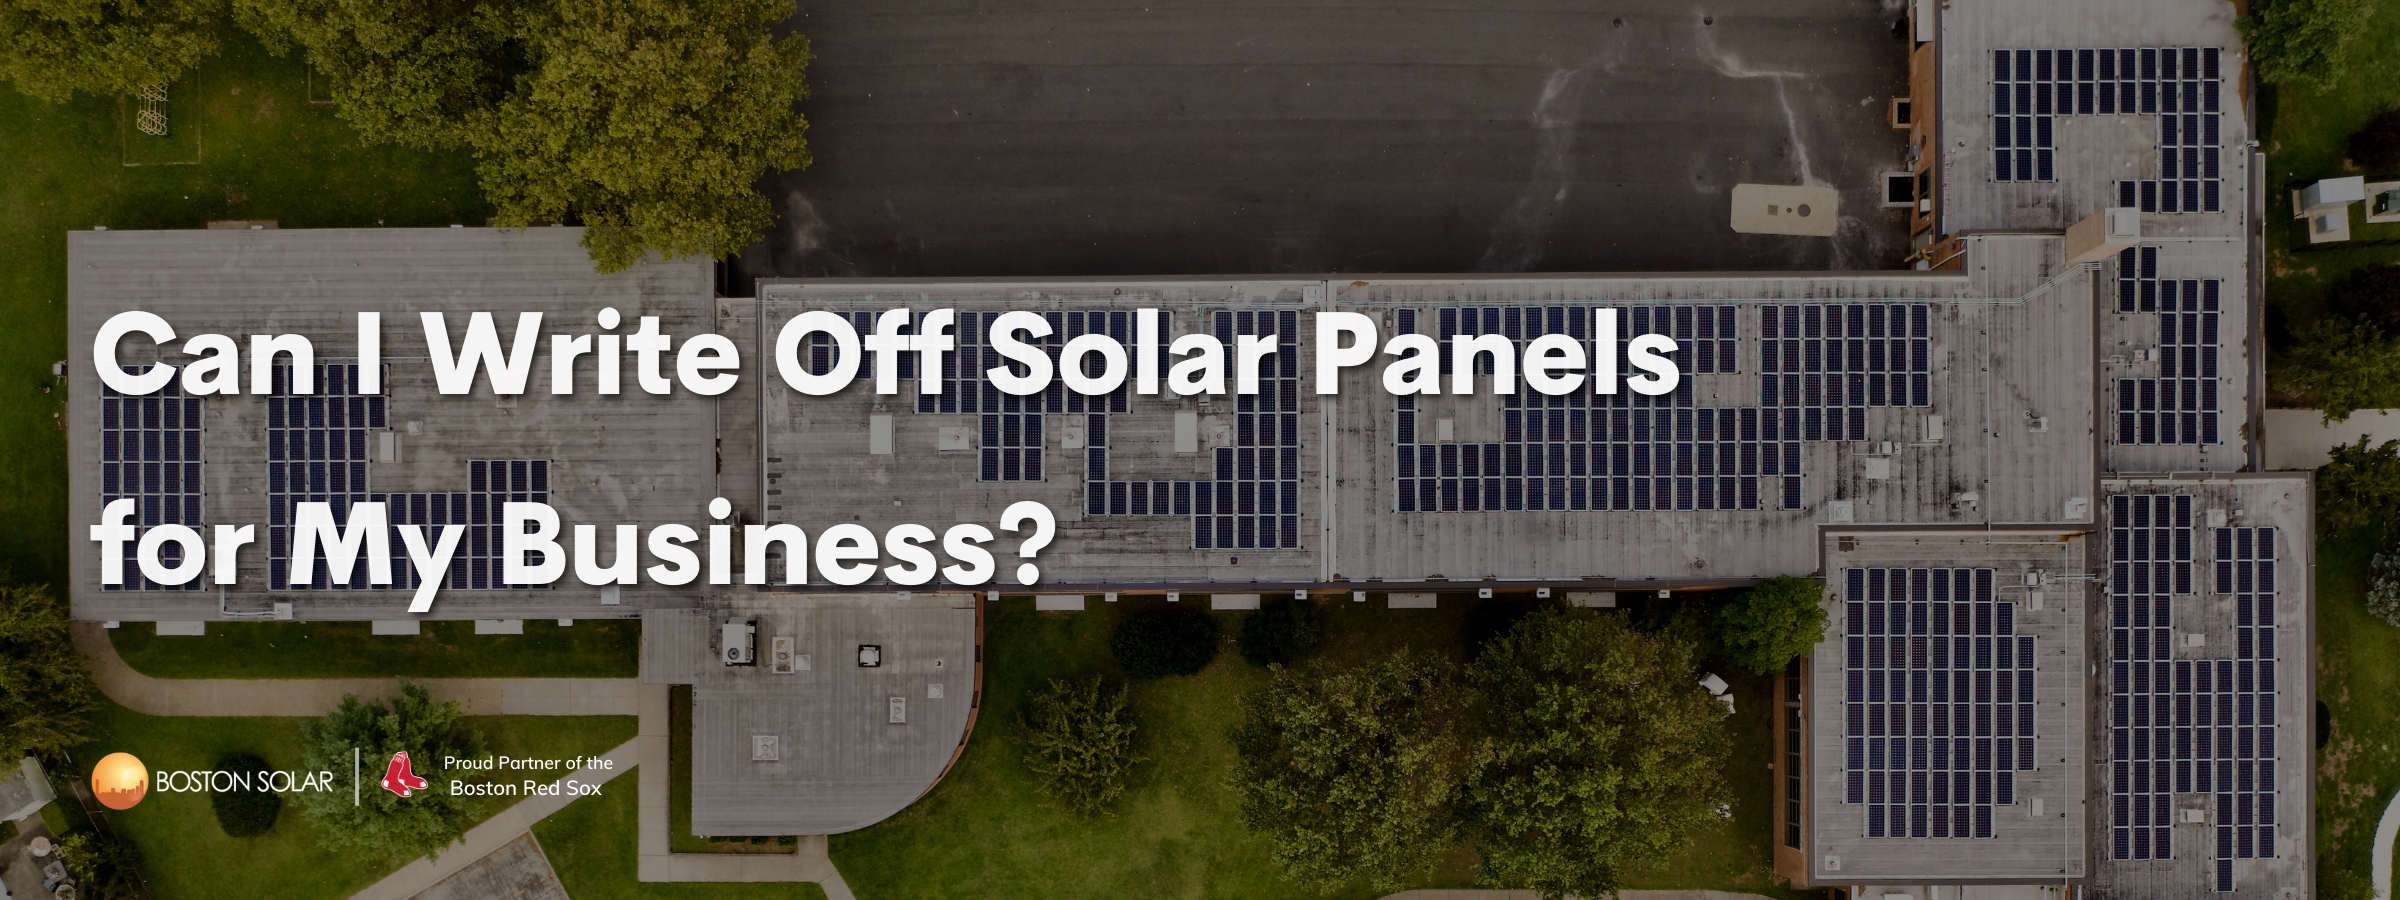 Can I Write Off Solar Panels for My Business?